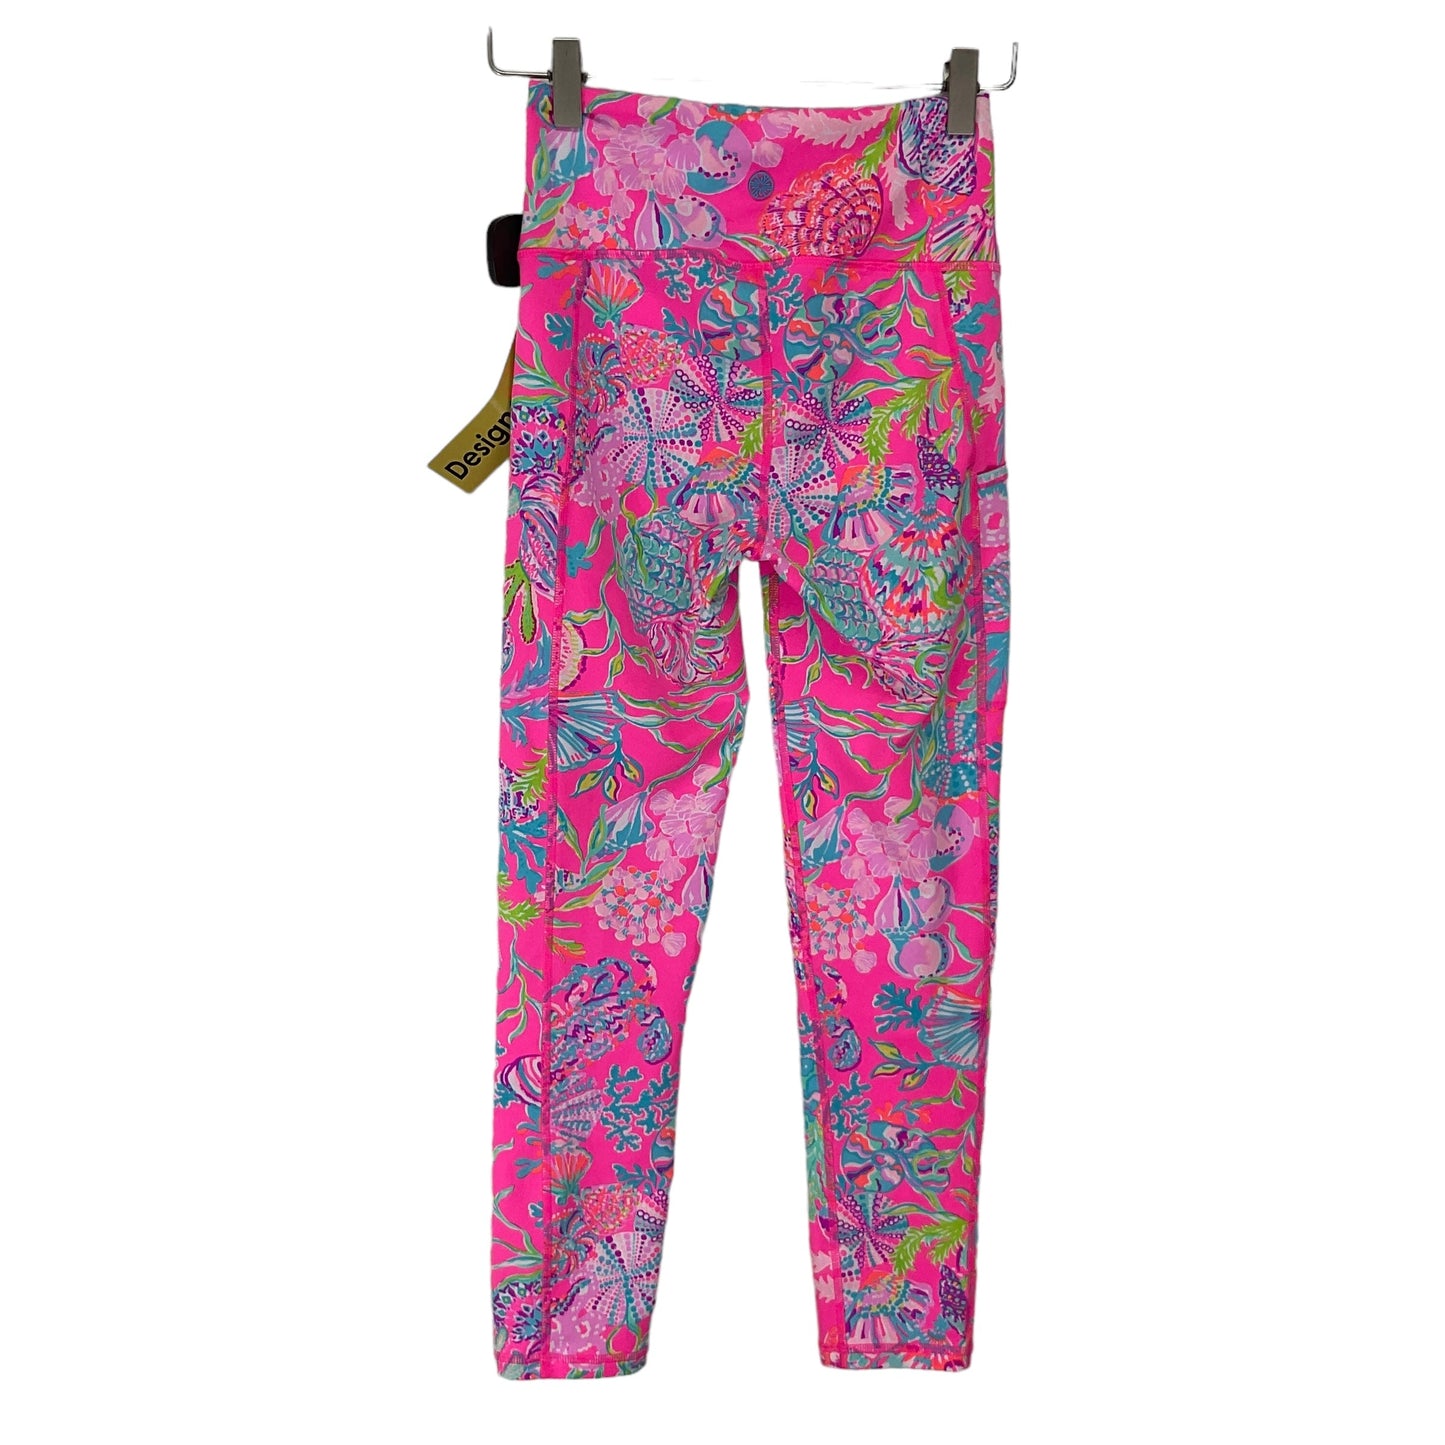 Pink Pants Designer Lilly Pulitzer, Size Xs